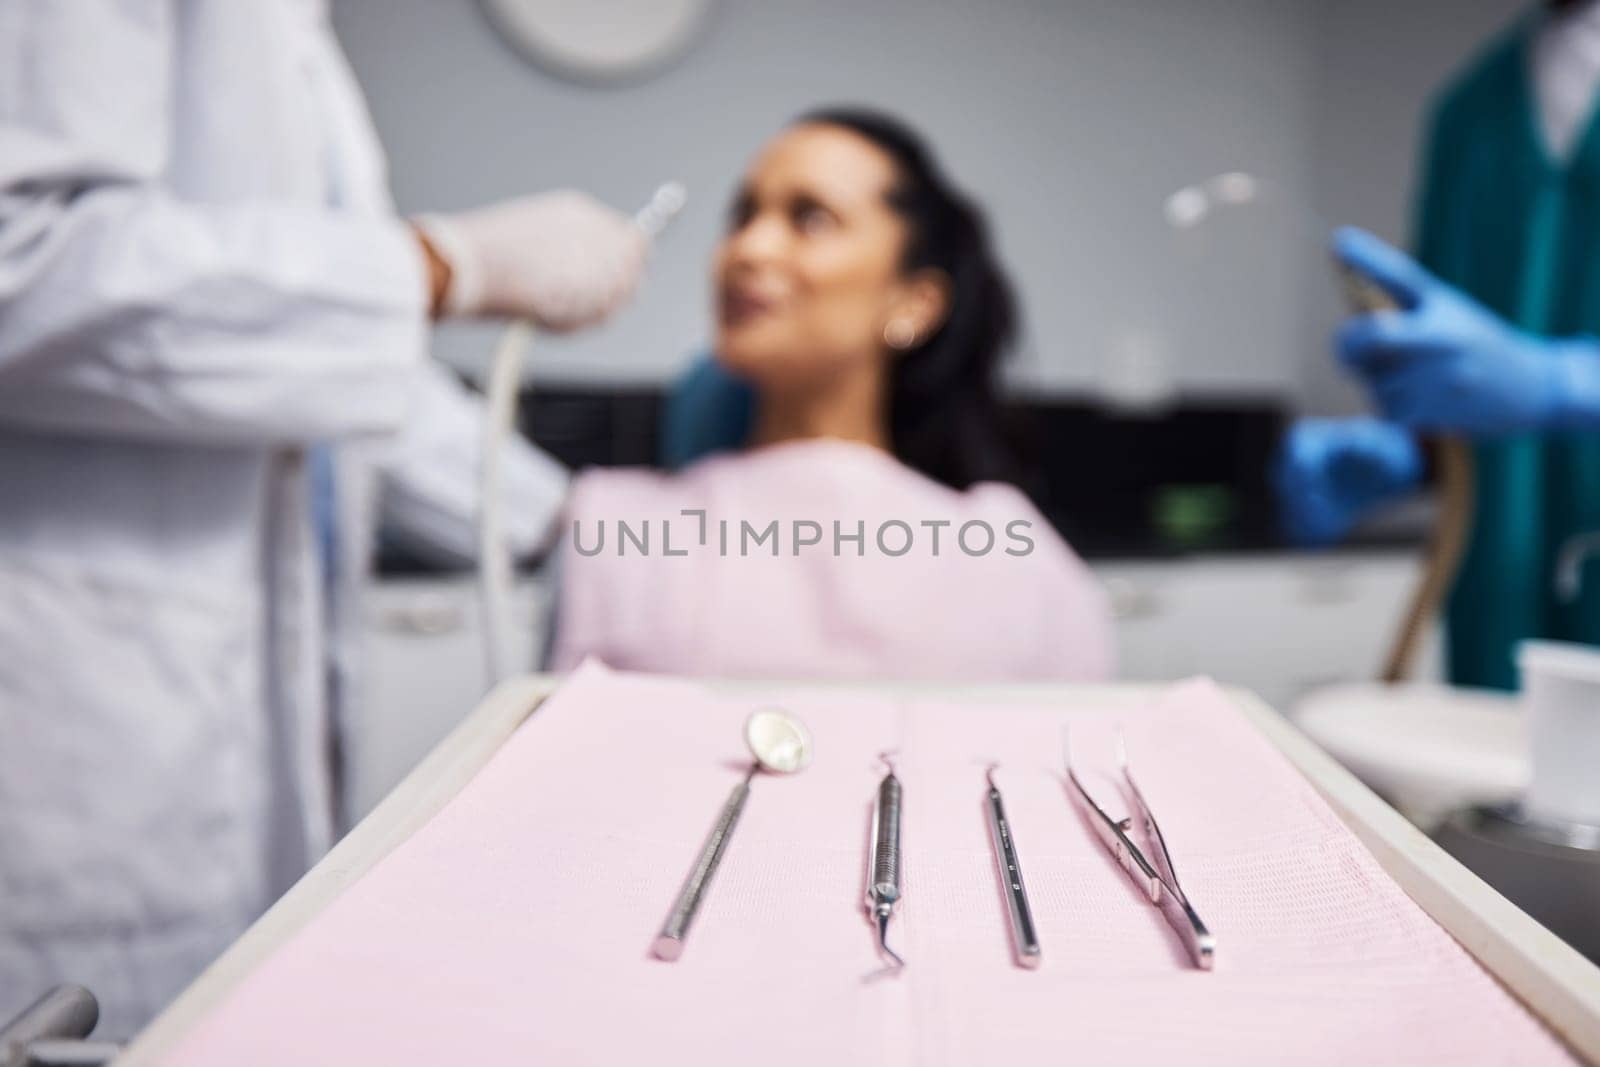 Reporting for dental hygiene duty. a woman having dental work done on her teeth with various tools in the foreground